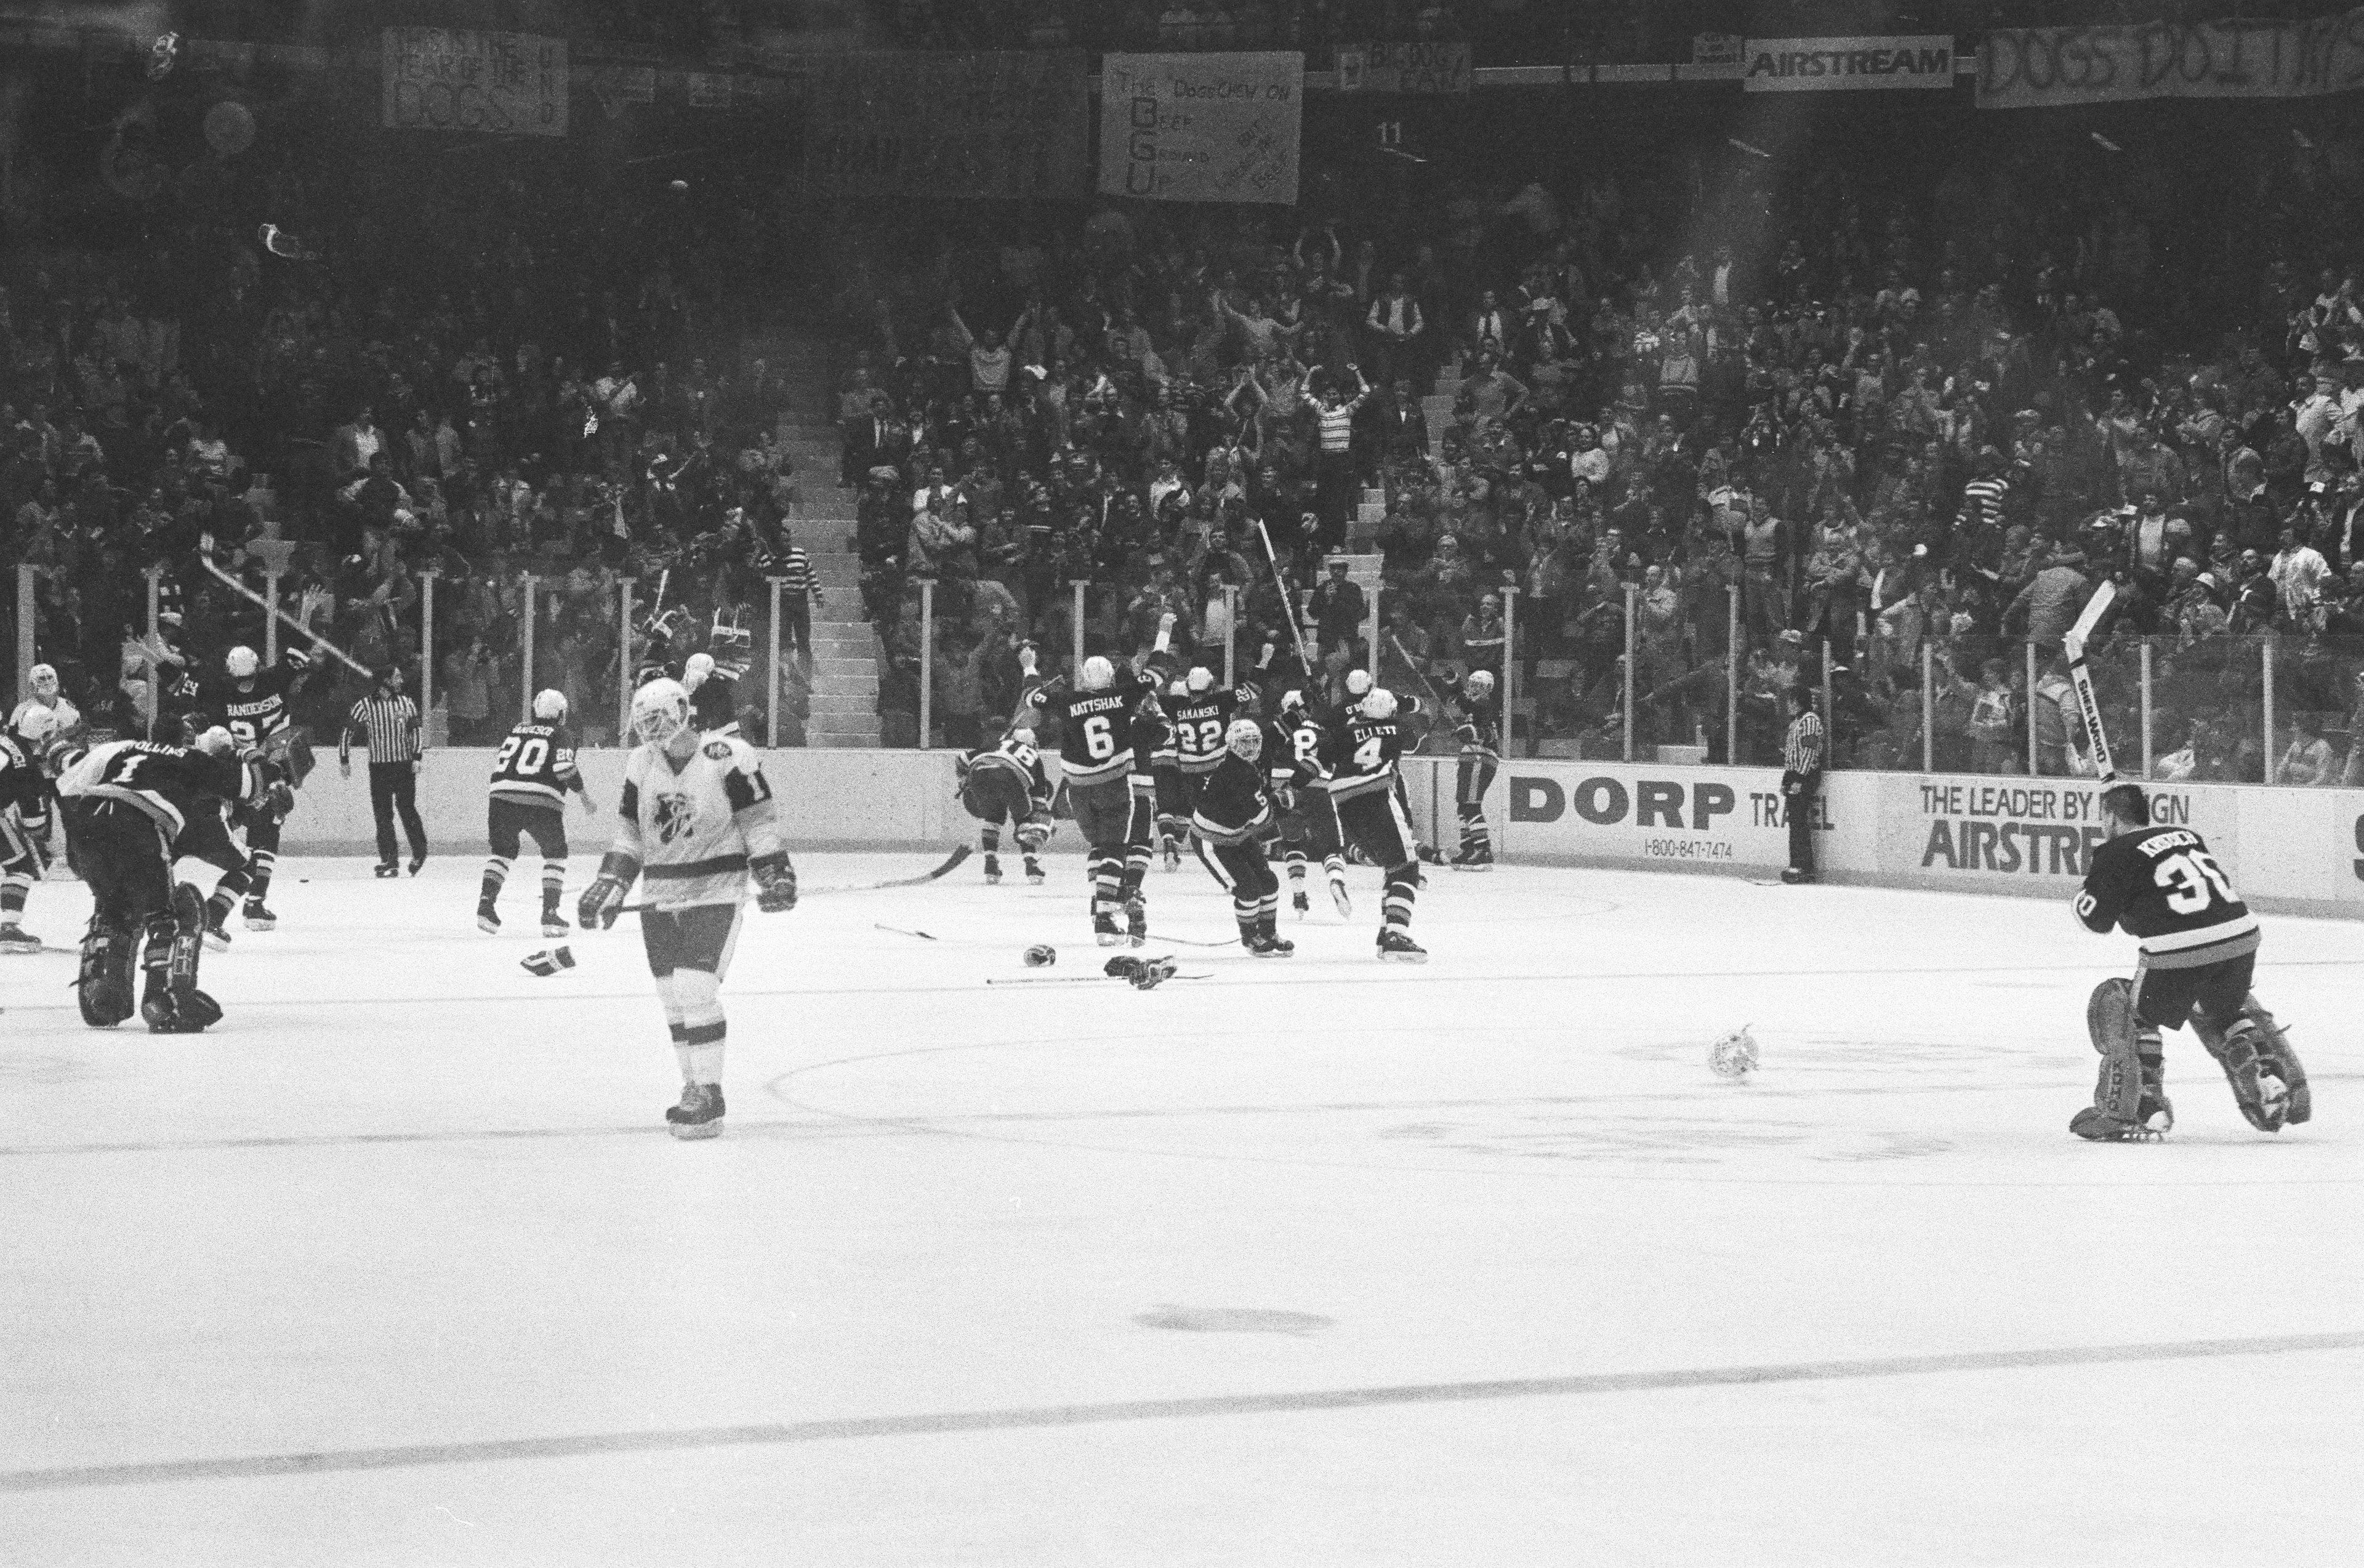 Bowling Green State University hockey players celebrate on the ice after winning the 1984 national championship.